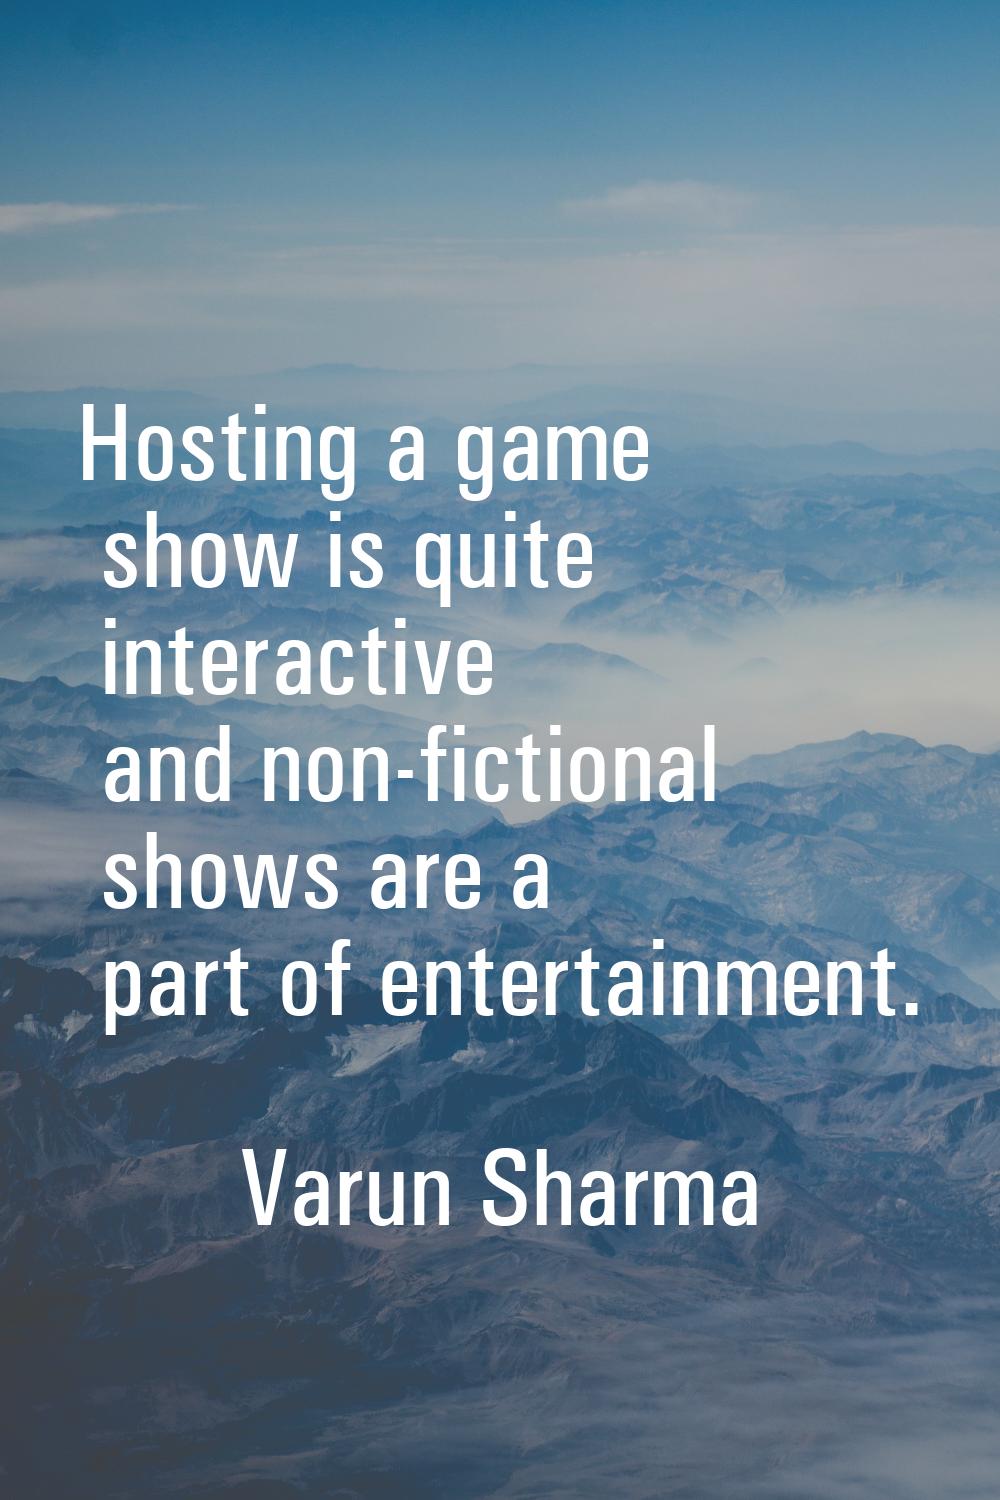 Hosting a game show is quite interactive and non-fictional shows are a part of entertainment.